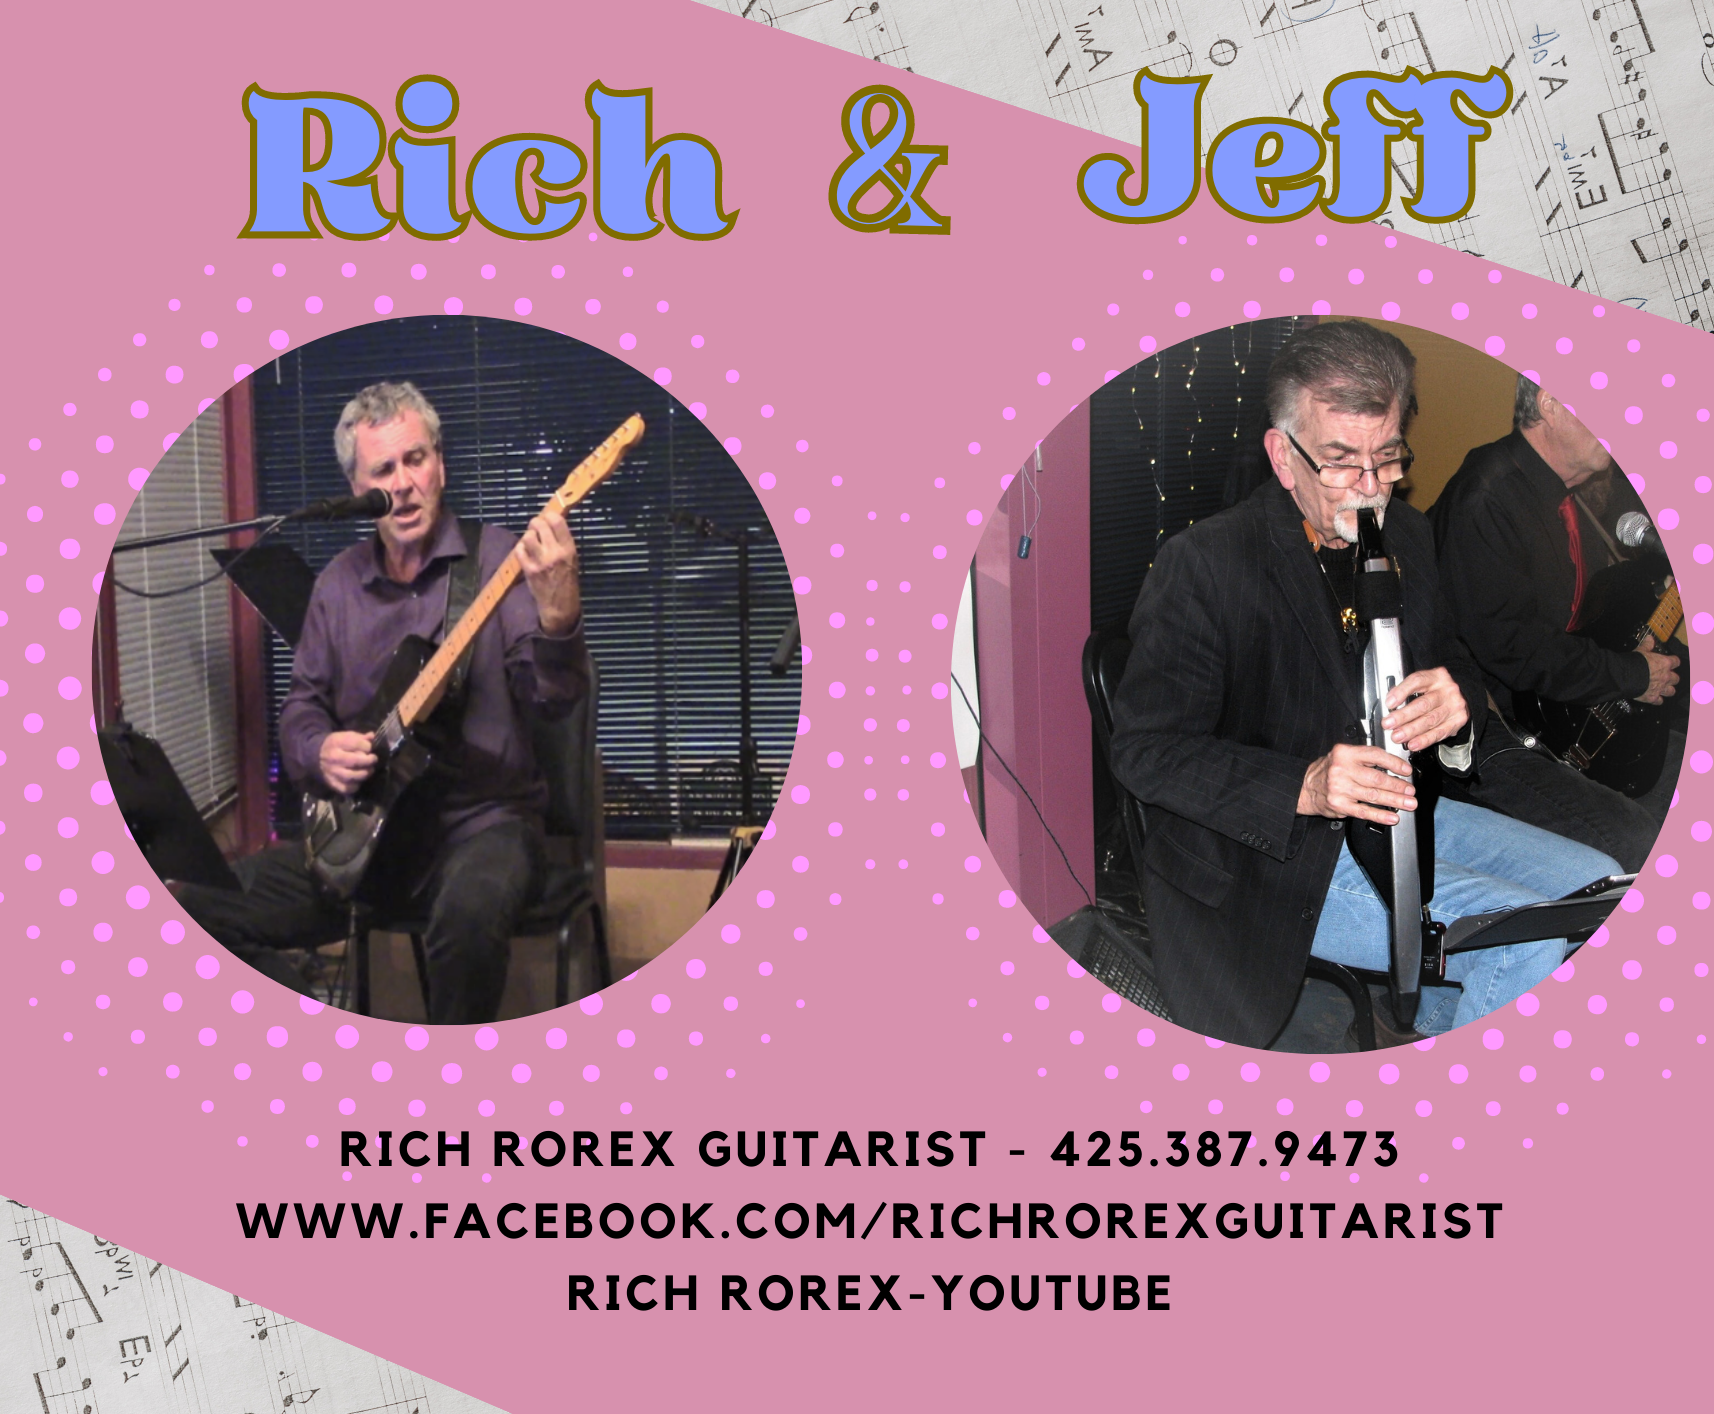 rich and jeff